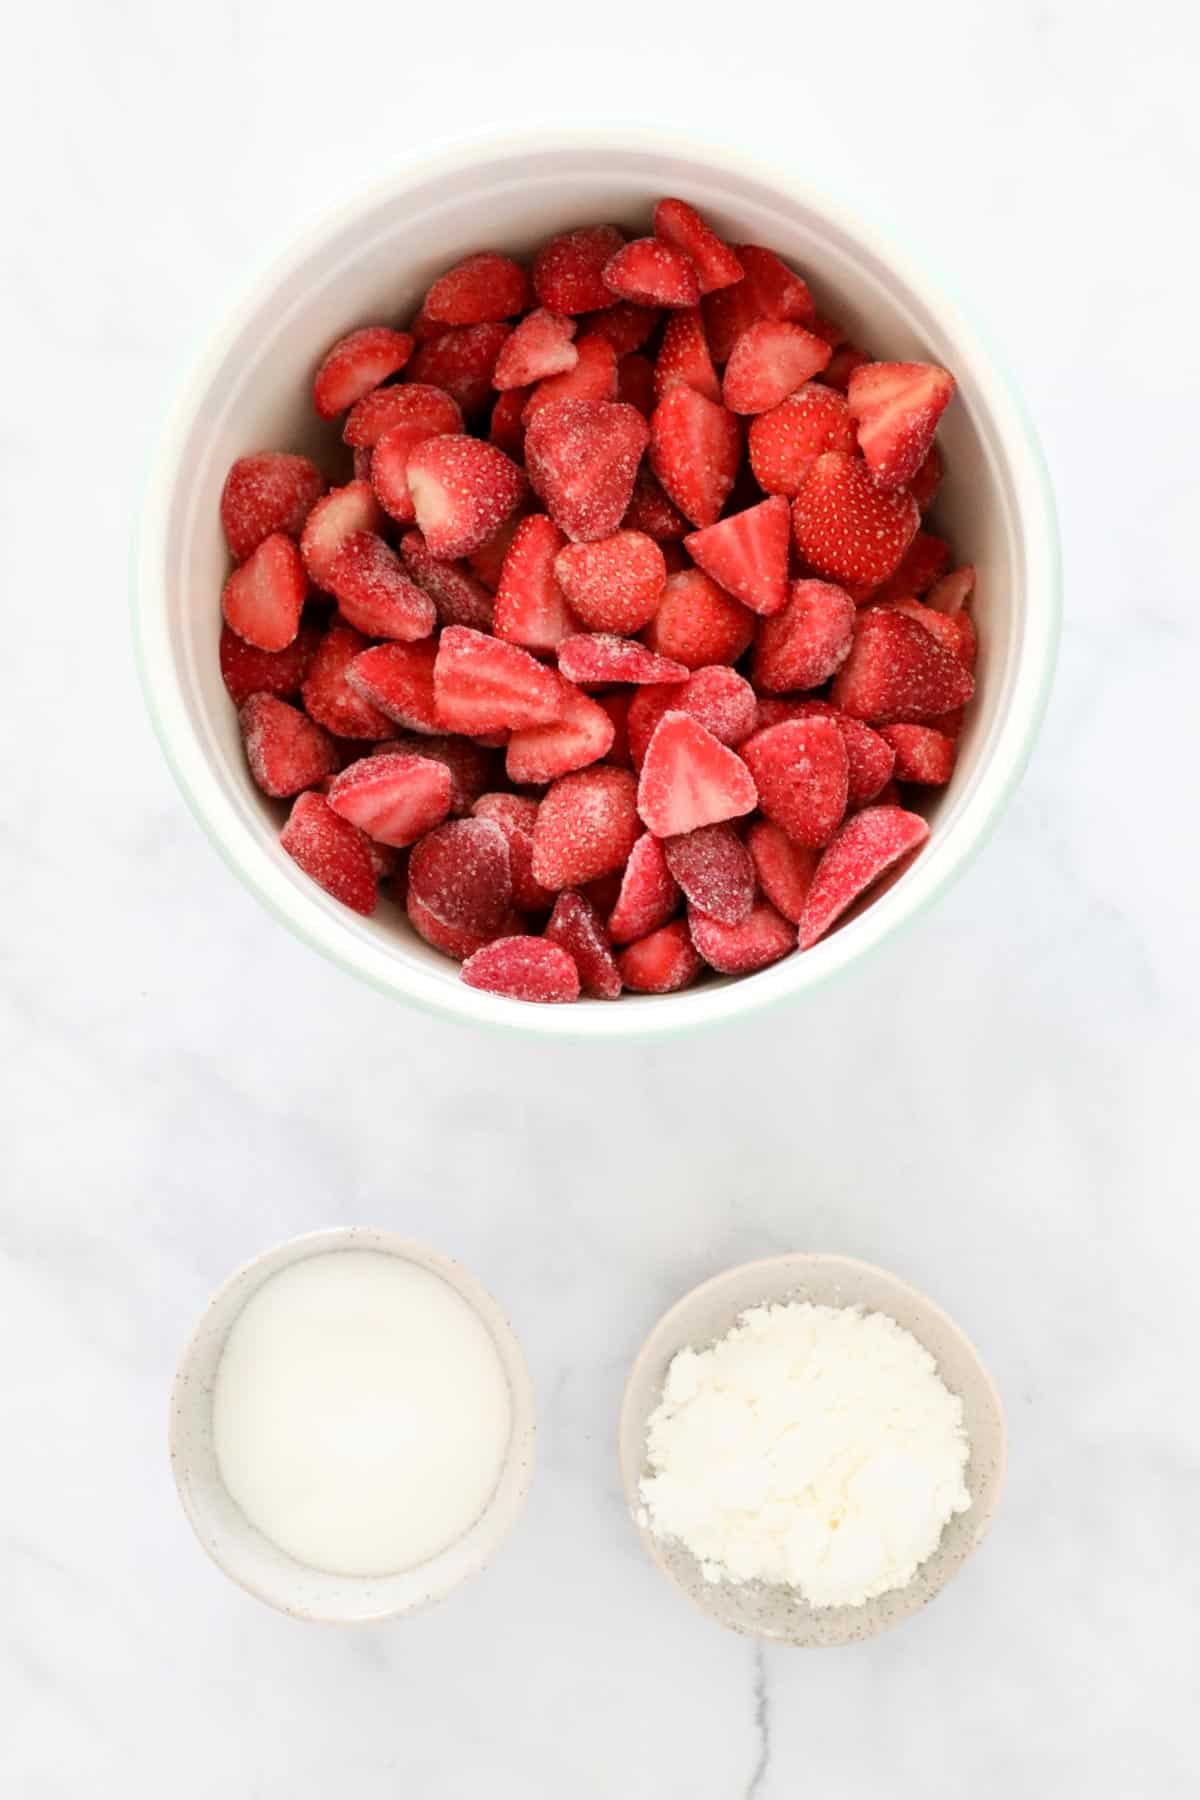 Frozen and halved strawberries, cornflour and sugar in individual bowls.